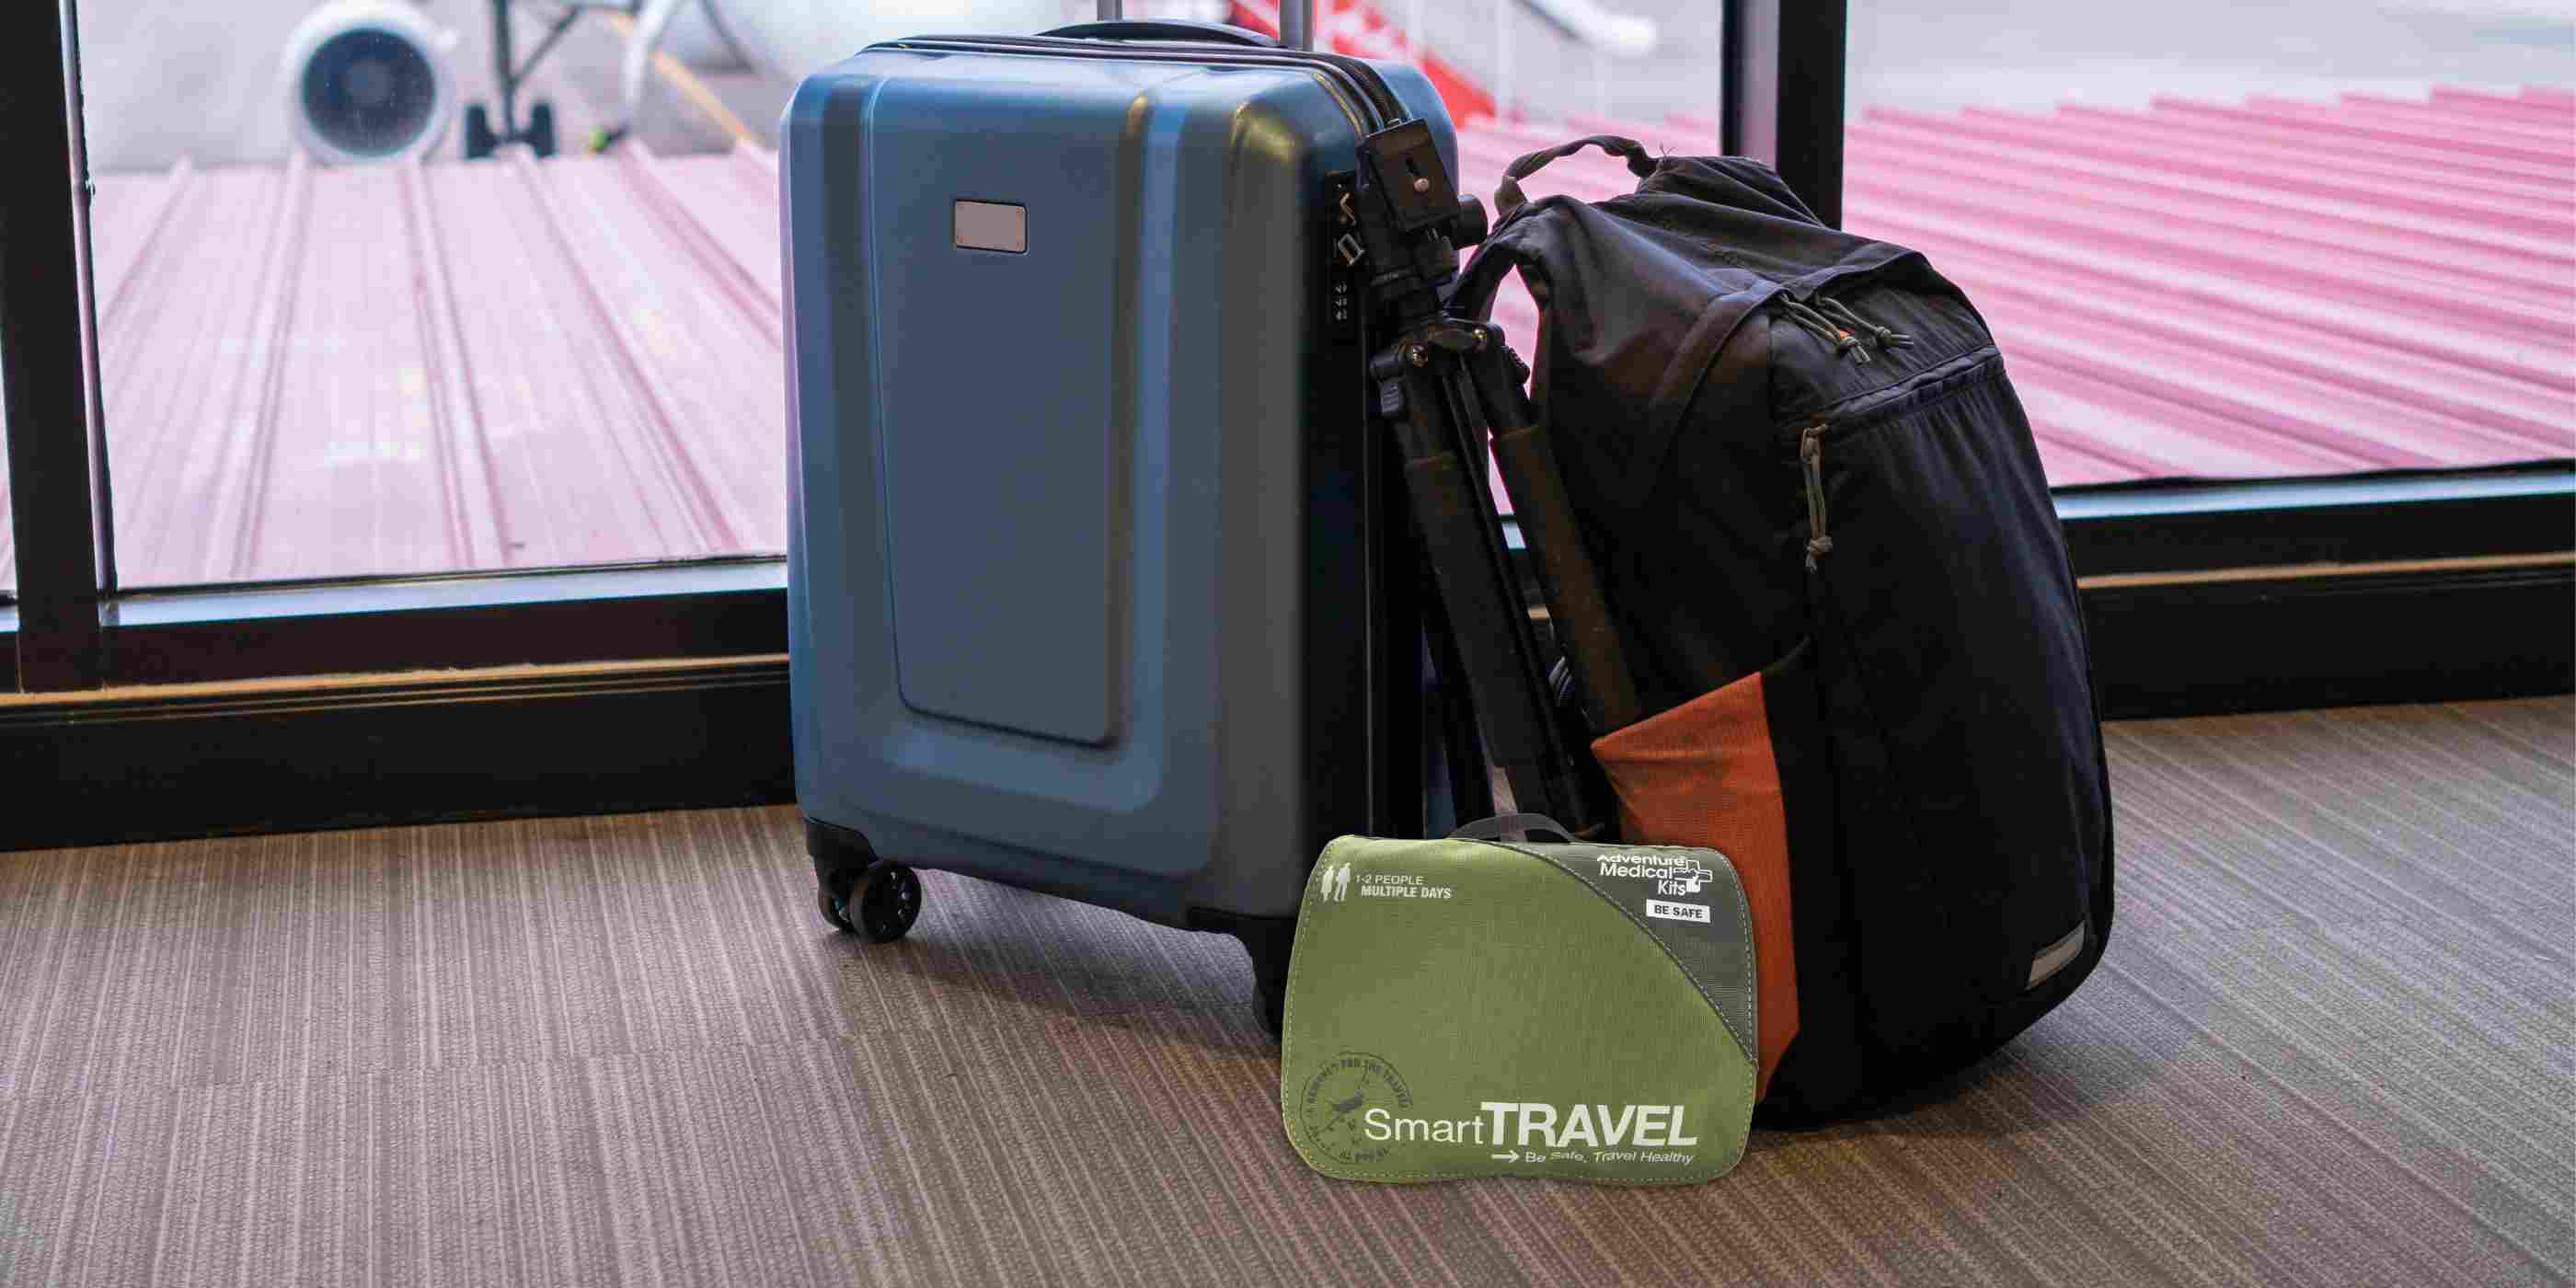 Travel Series Medical Kit - Smart Travel in front of luggage